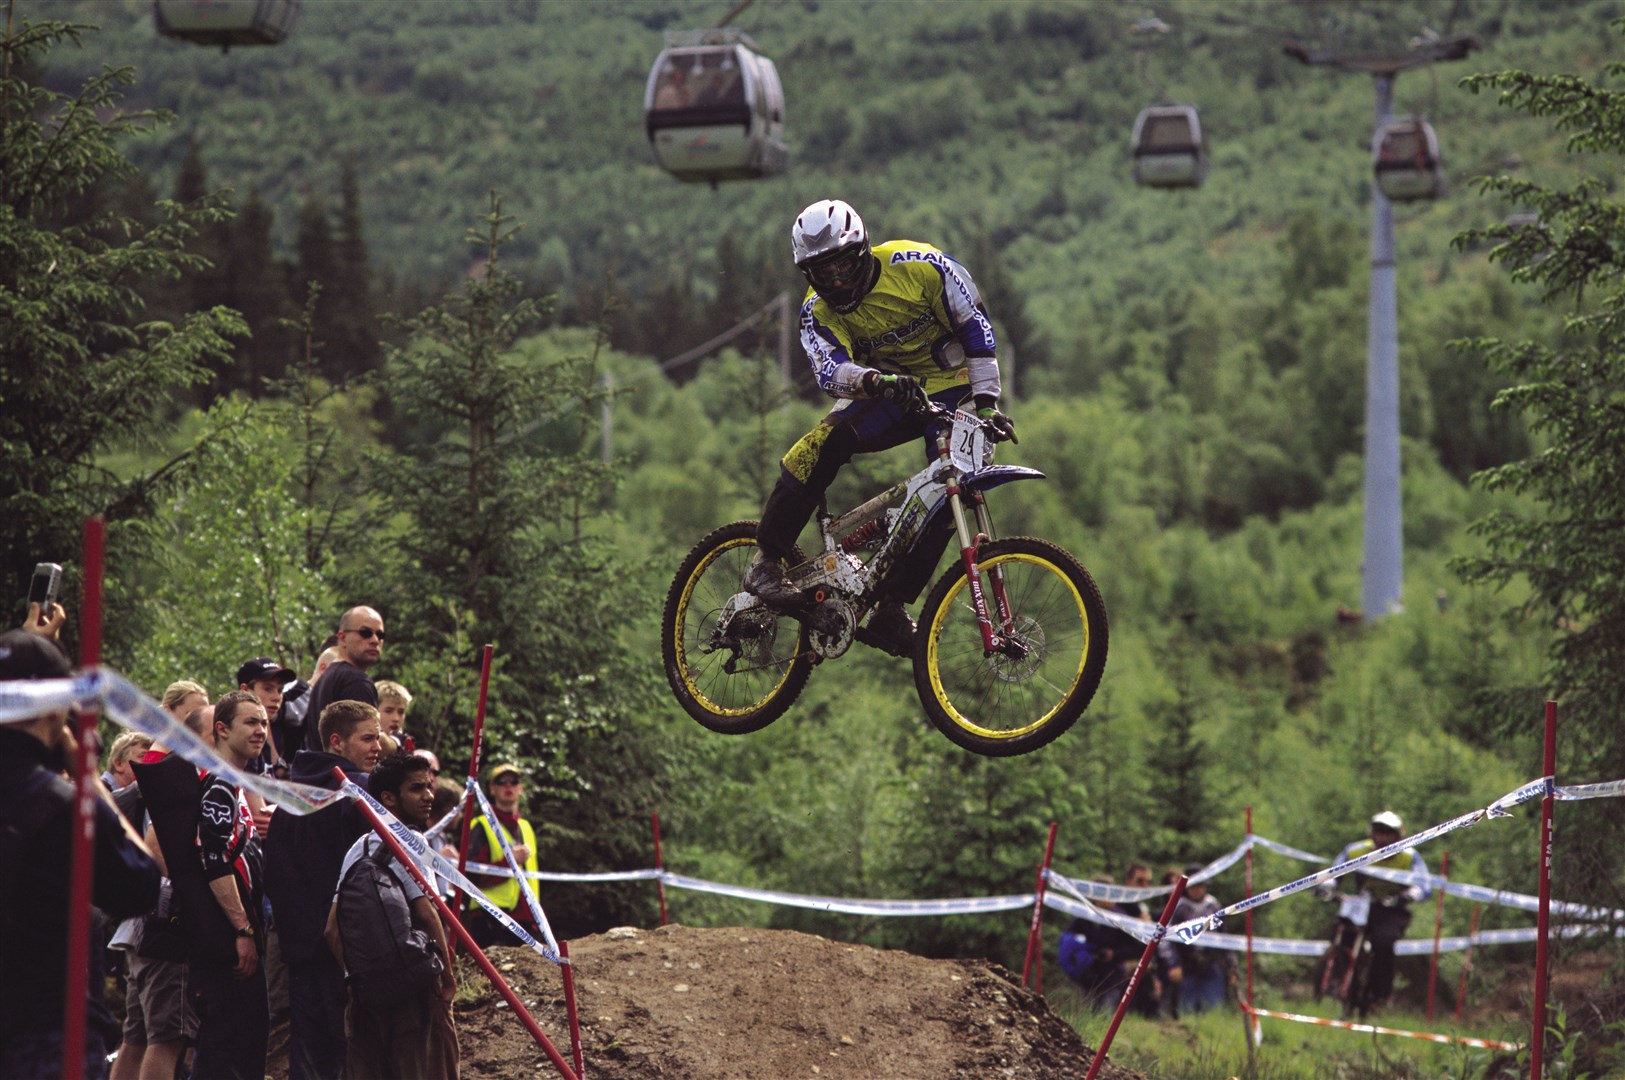 Fort William is a host venue for the UCI Mountain Bike World Cup series but Cairngorm Mountain's new attraction will be aimed at family market.